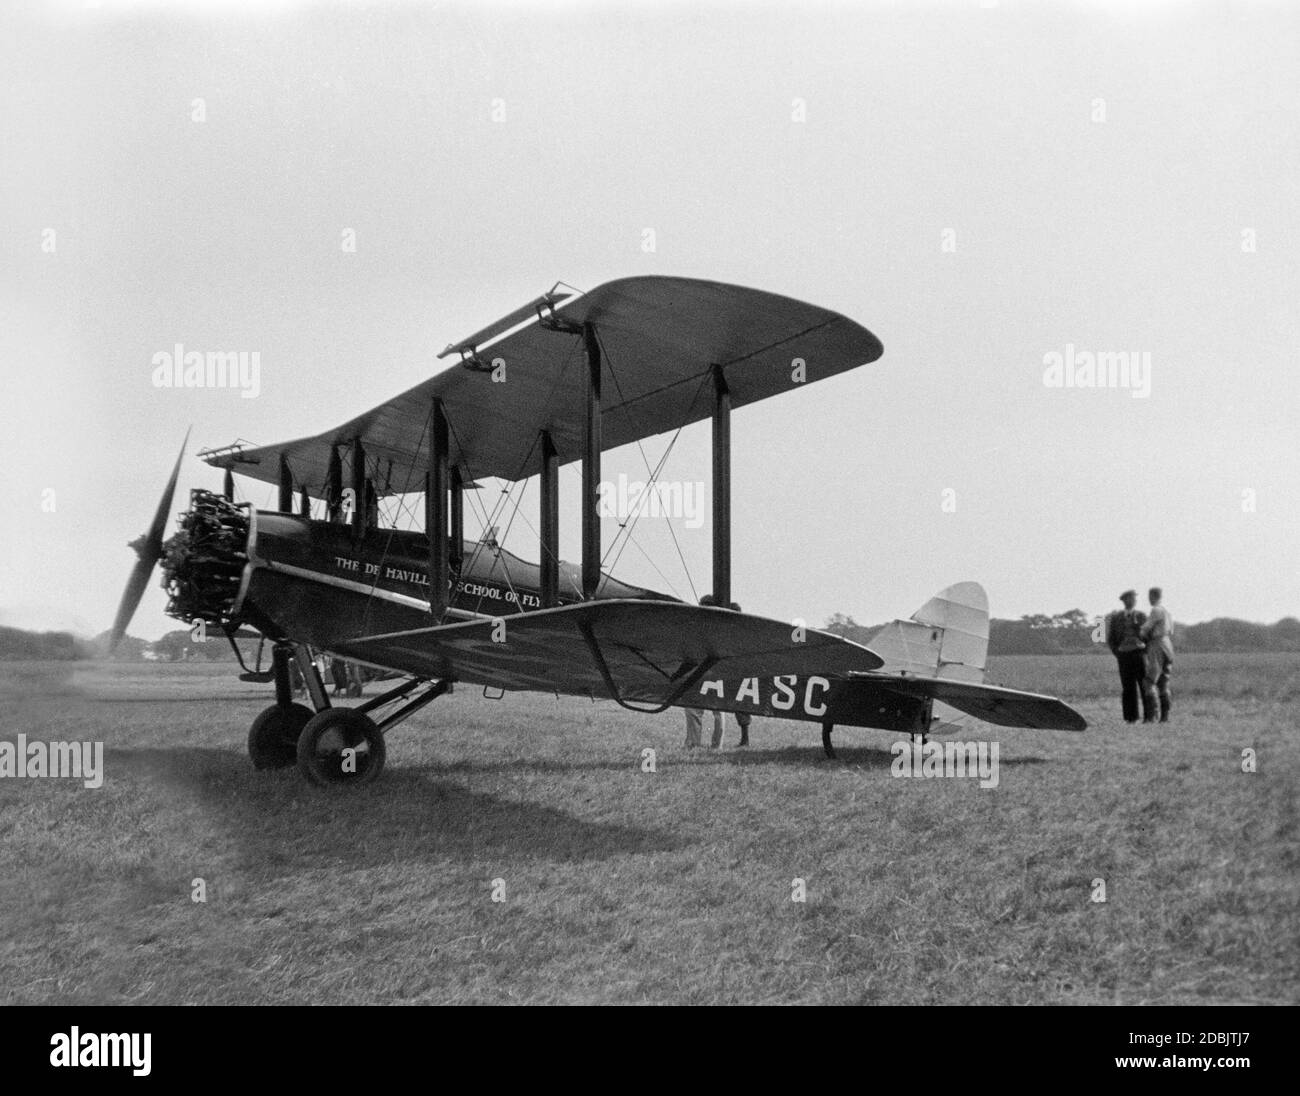 Vintage black and white photograph of a De Havilland DH.9J aeroplane, registration G-AASC, belonging to the De Havilland School Of Flying, at an airfield in England in 1930. two men in the photo. Stock Photo